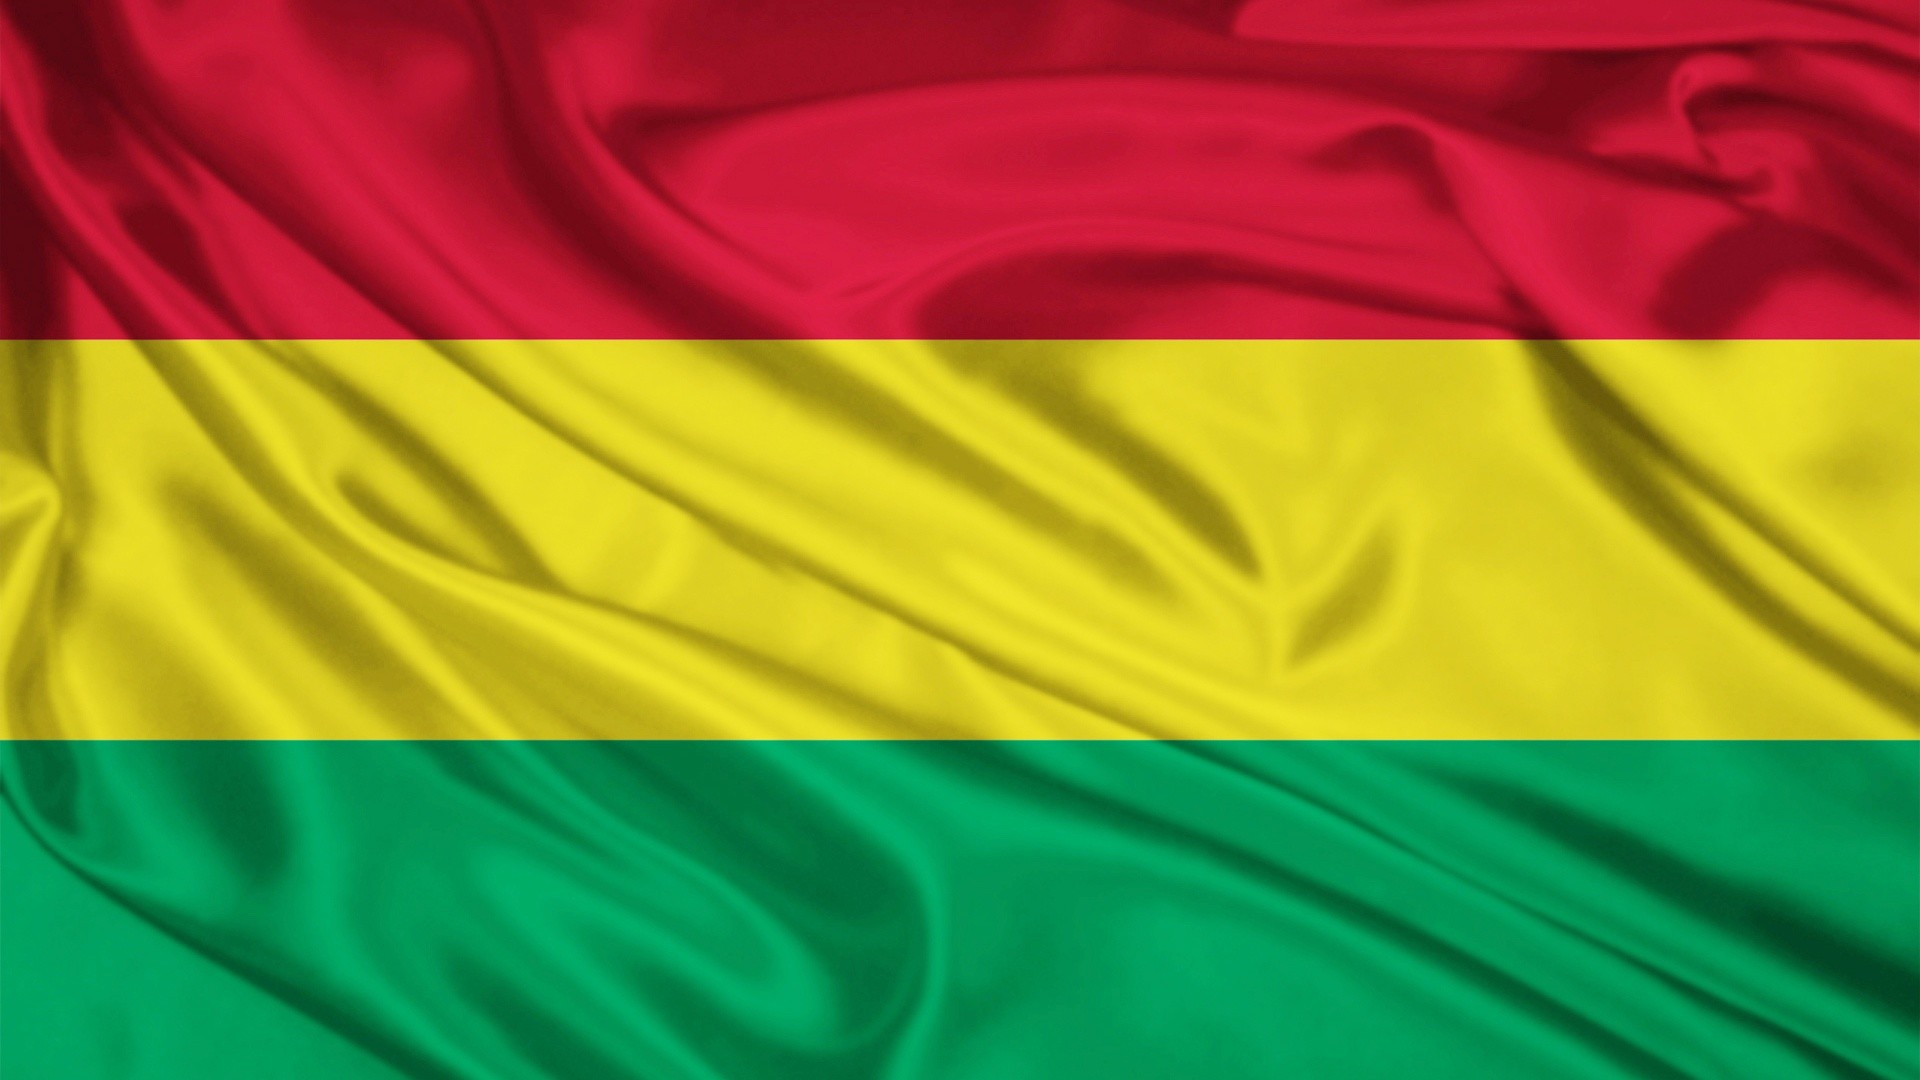 1920x1080 Computer Flags Wallpaper Ethiopia Waving Flag ~ Stock Video Footage  #12258295 | Pond5 ...